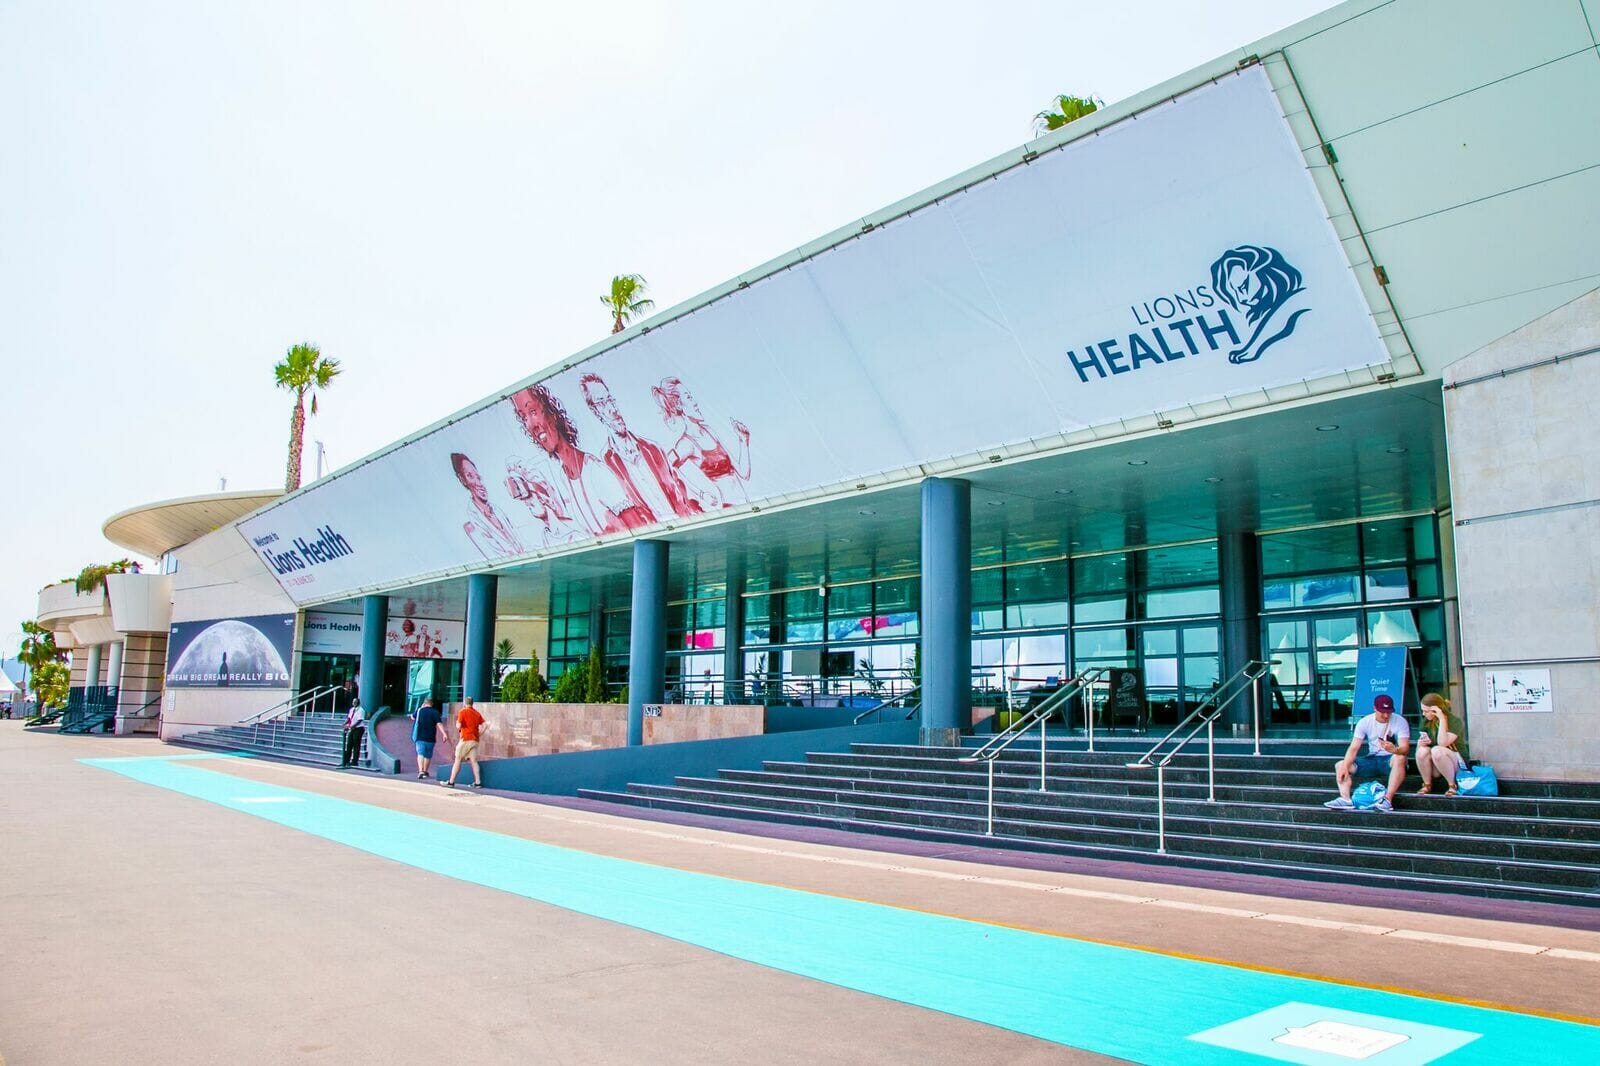 Day 2 at Lions Health: Watson’s got its eye on you, Cannes